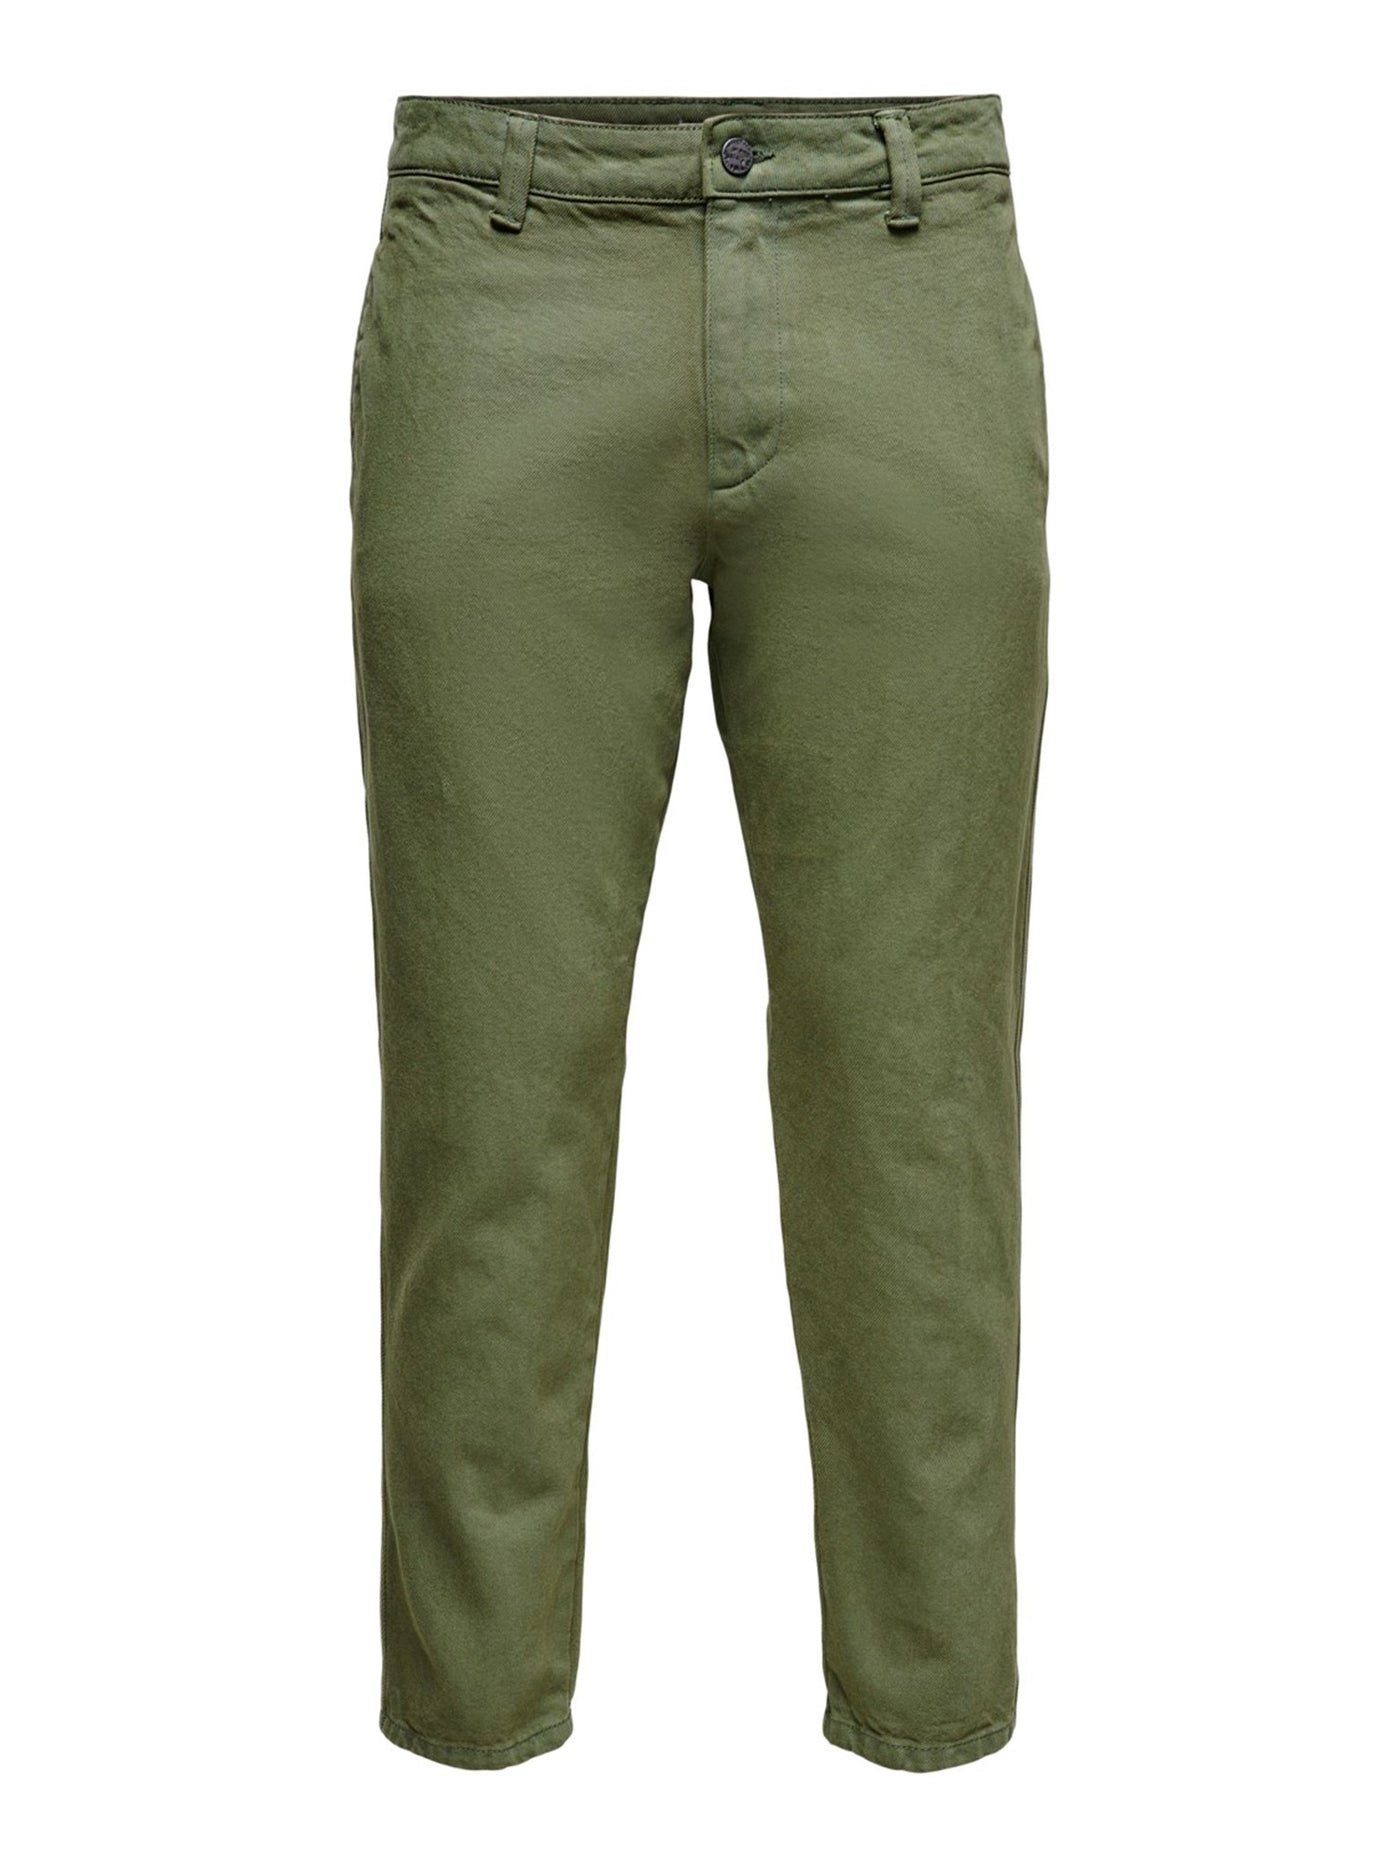 Avi Beam Chino Twill Pants - Olive Night - Only & Sons 6